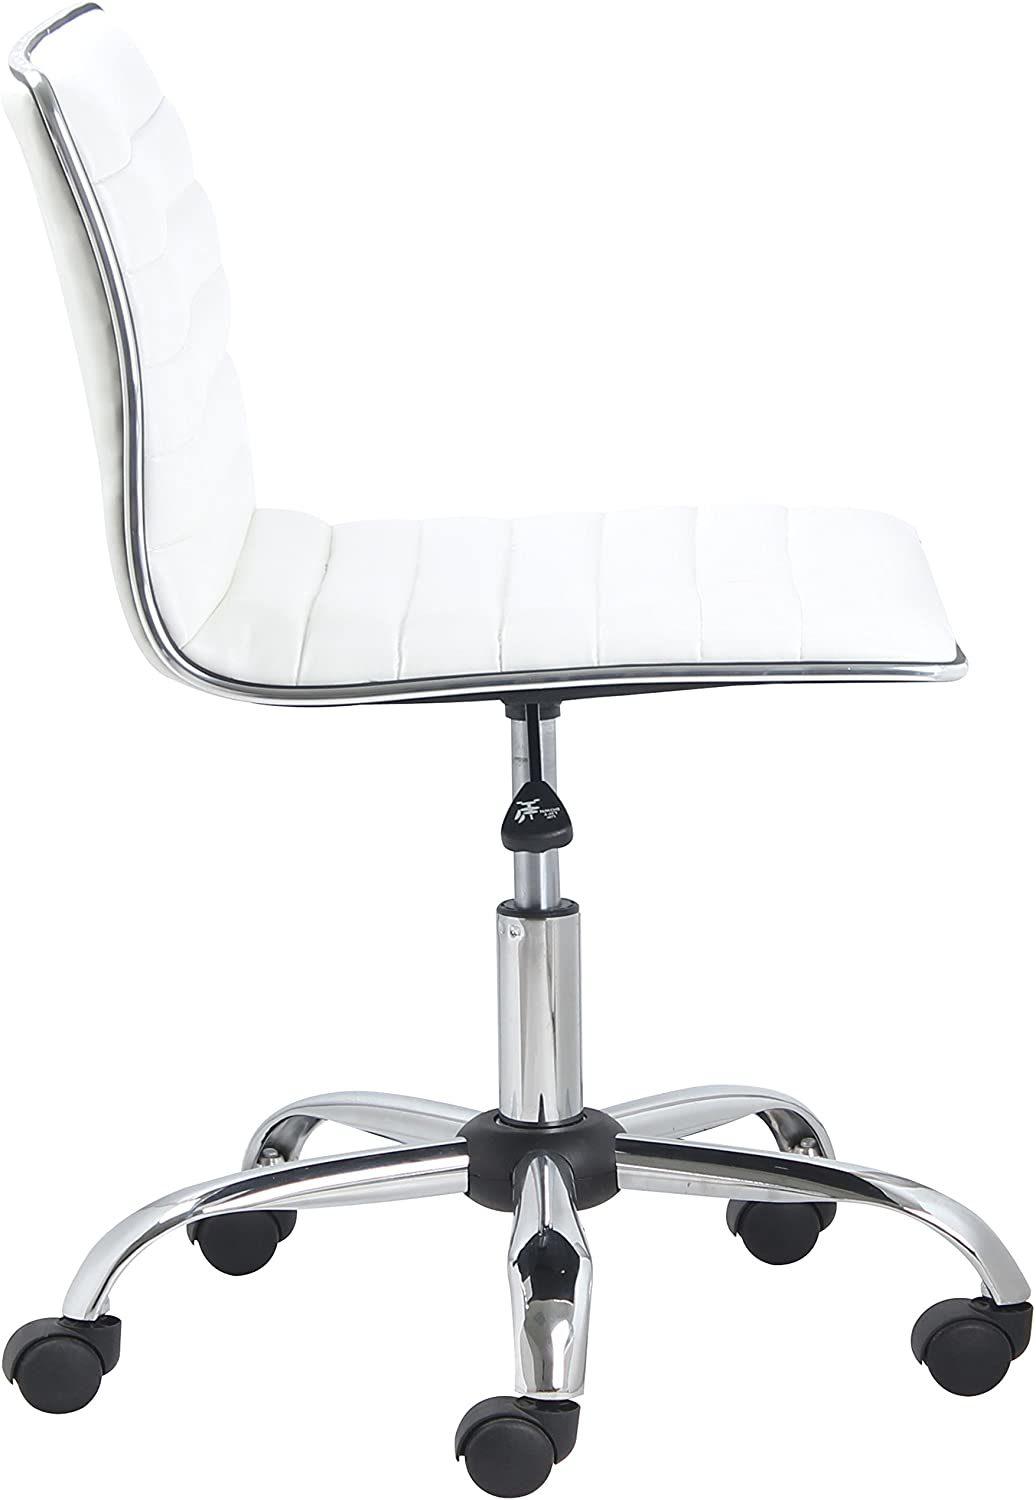 Free Sample Boss Swivel Revolving Manager PU Leather Executive Office Chair/Chair Office Mesh Chair